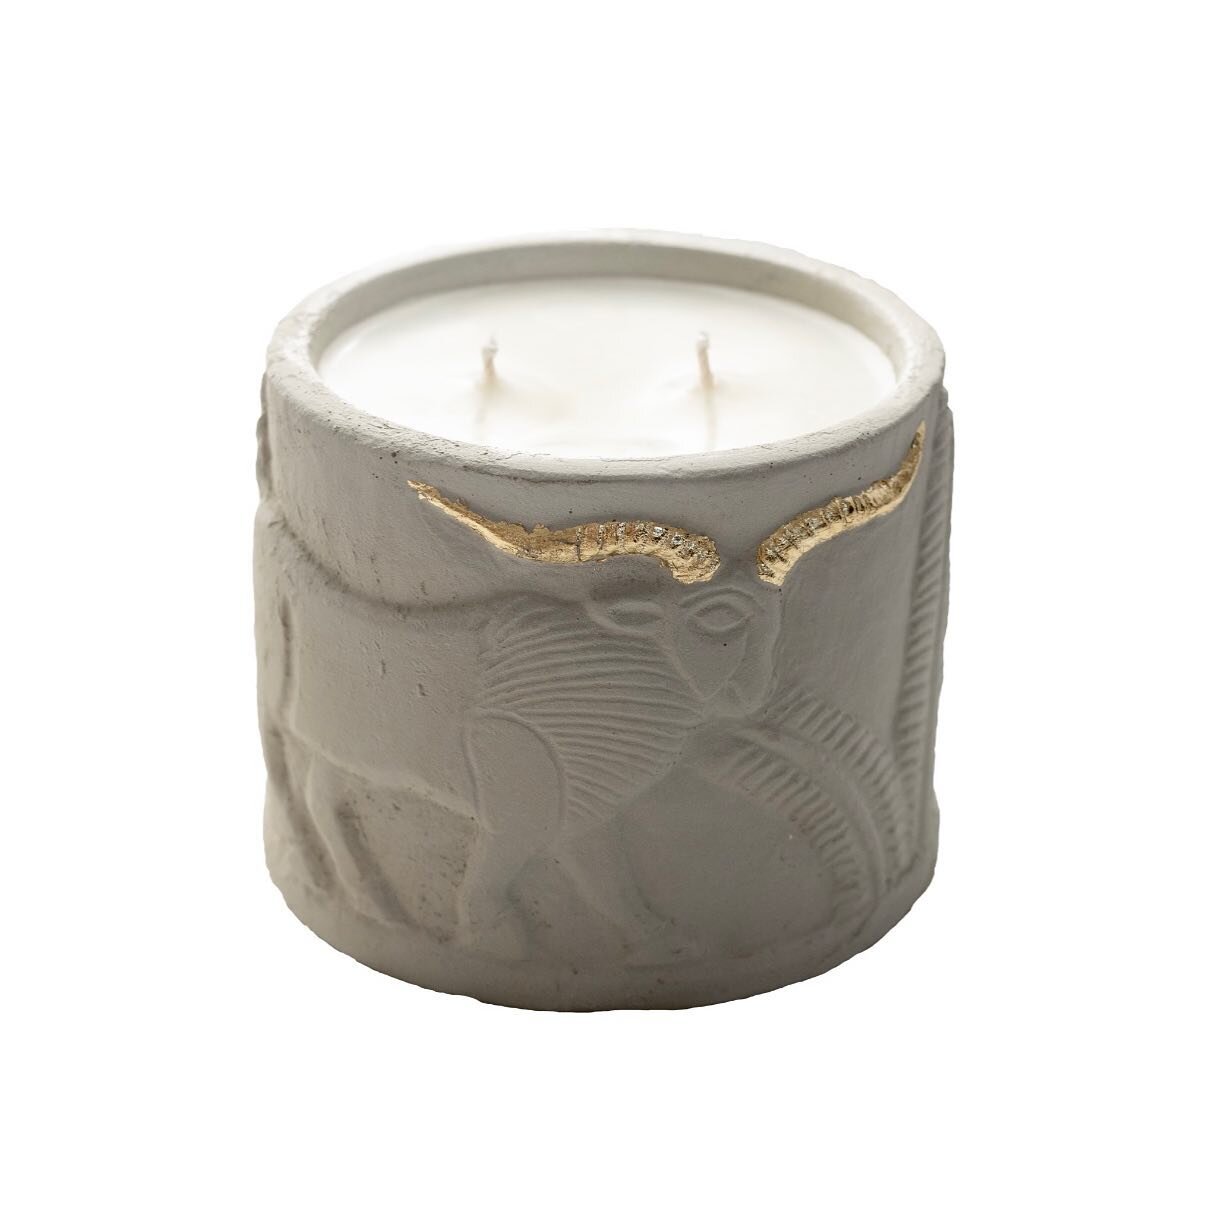 Garden of Babylon large candle vessel. Hand carved in beautiful modern concrete and perfumed with our exclusive &quot;Apolonias garden&quot; fragrance with notes of basil, bergamot, violet and sage.

Only available at scentremains.com 

#concretedesi